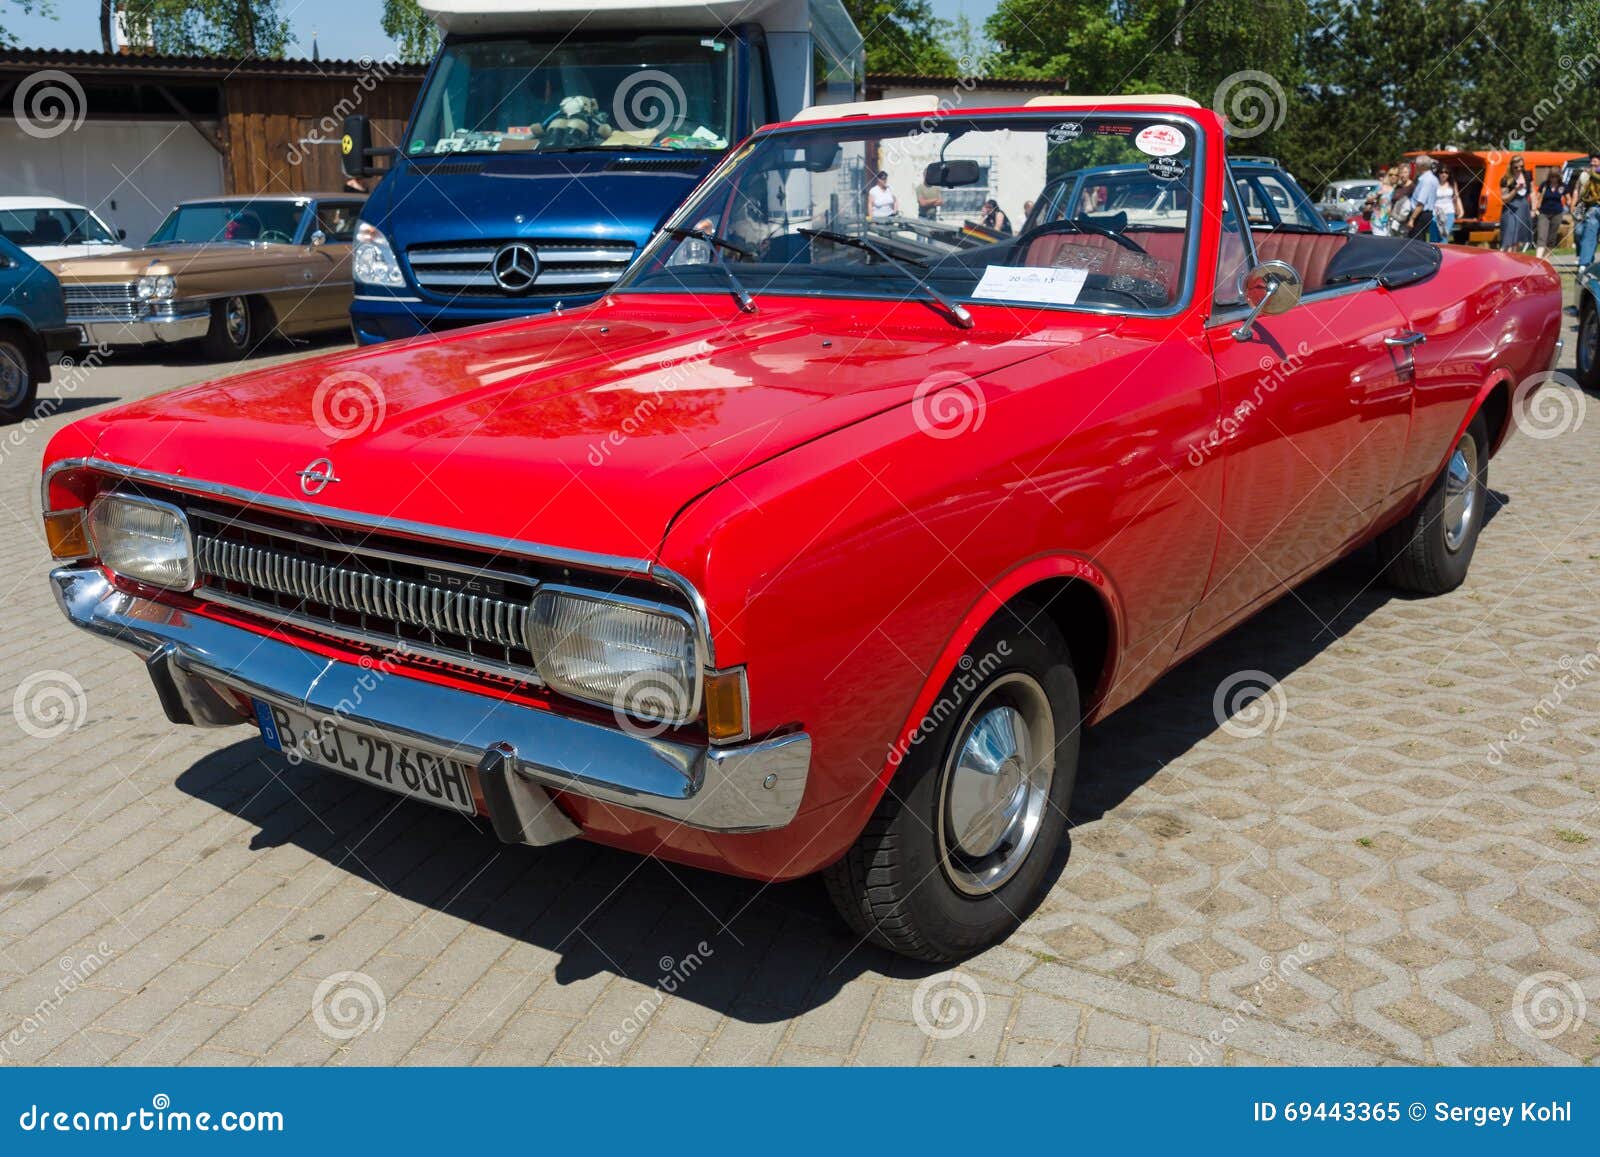 Opel Rekord C convertible editorial image. Image of oldtimer